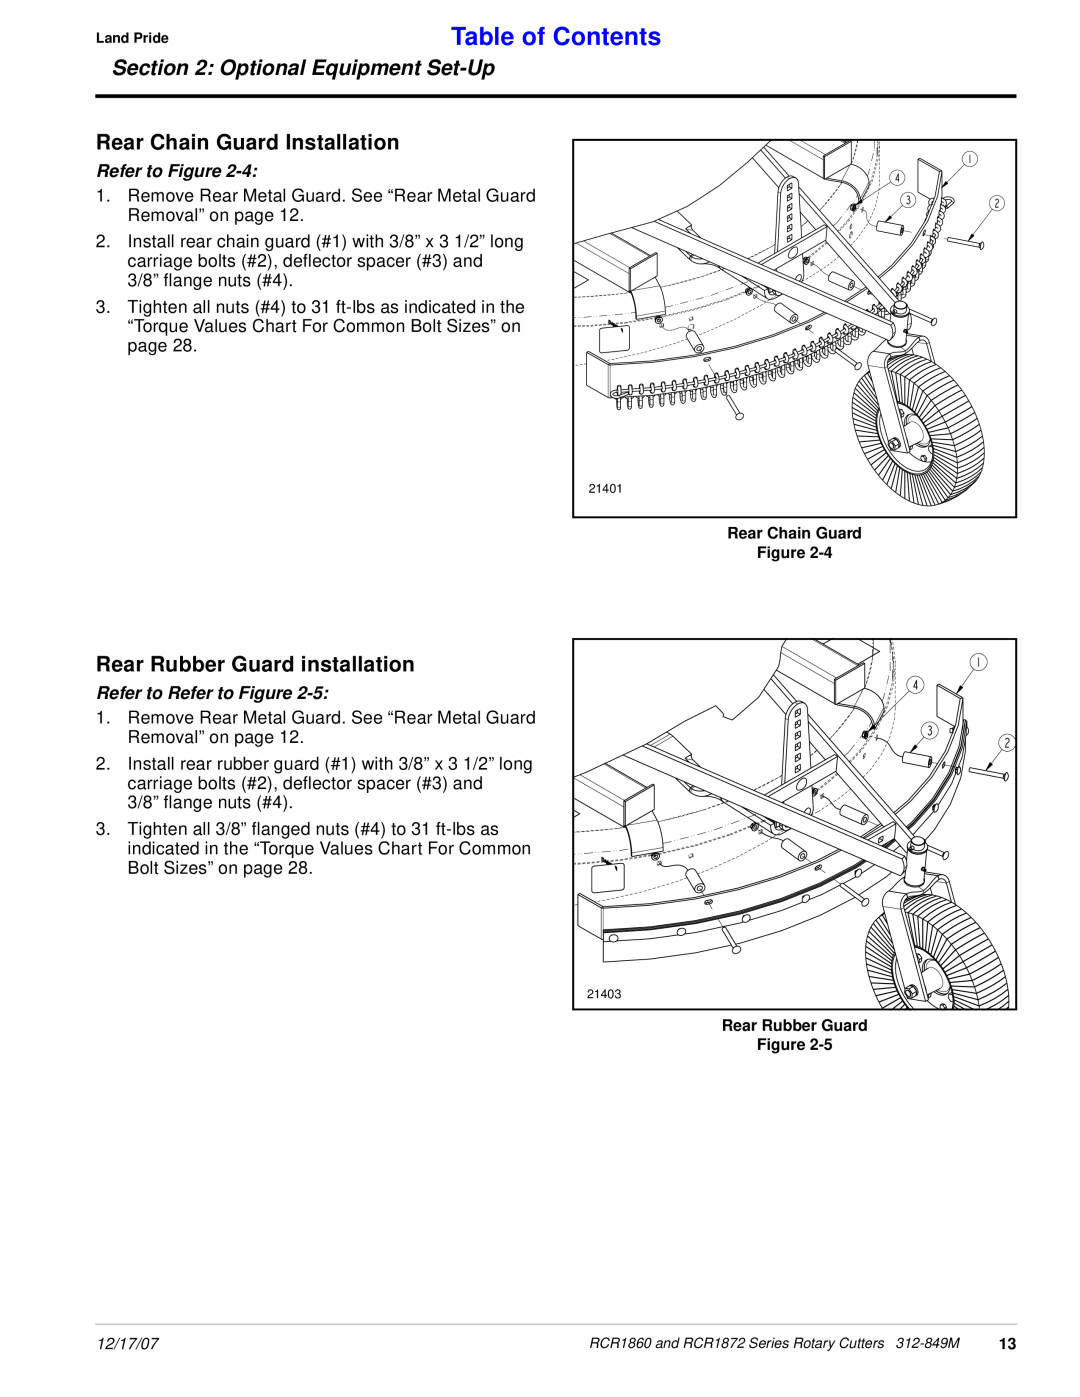 Land Pride RCR1872 manual Rear Chain Guard Installation, Rear Rubber Guard installation, Table of Contents, Refer to Figure 